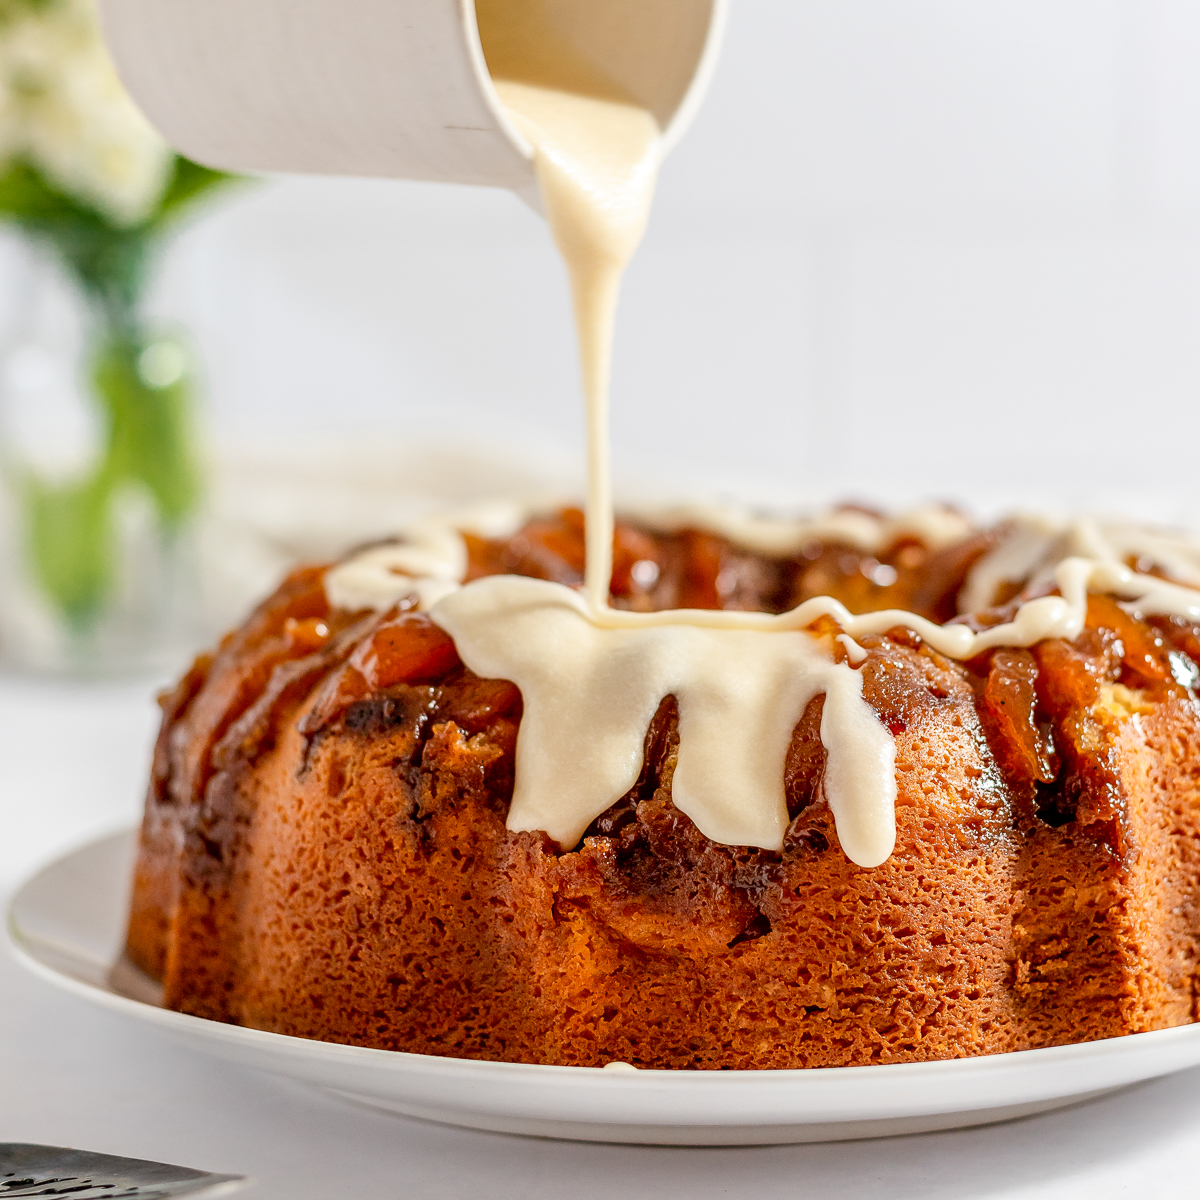 A bundt cake with creamy icing being drizzled over the top.